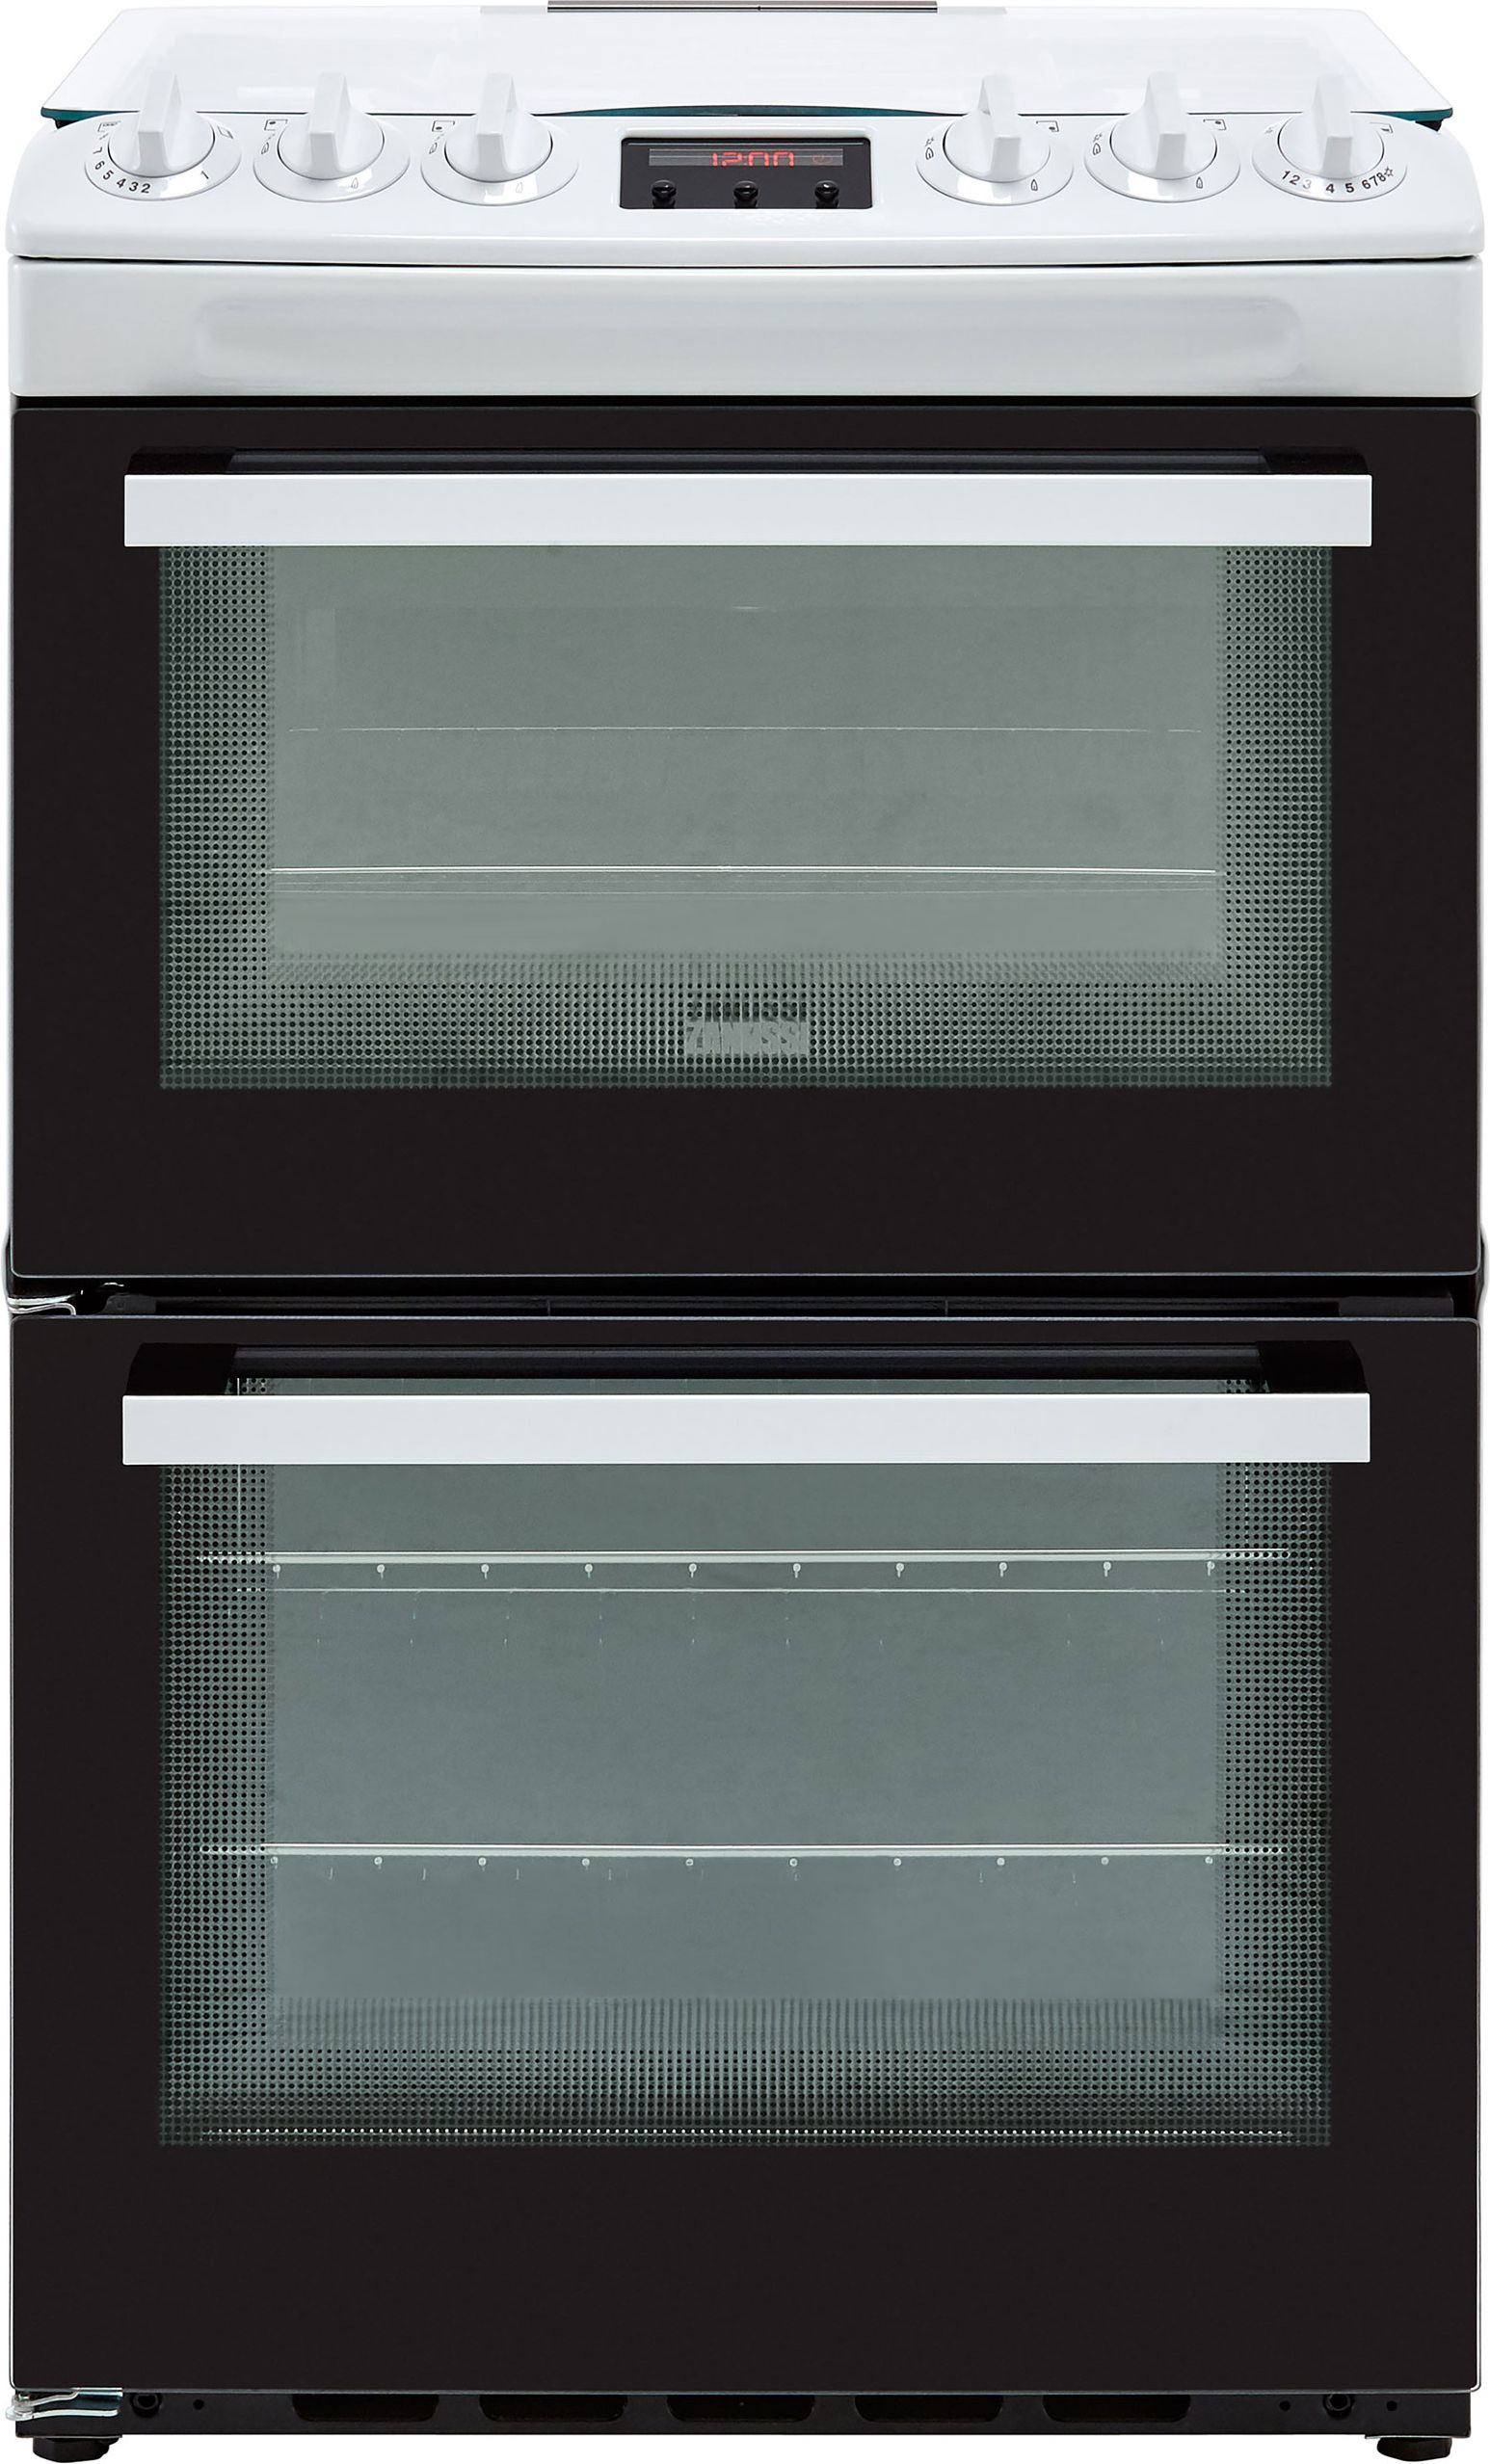 Zanussi ZCG43250WA 55cm Freestanding Gas Cooker with Full Width Electric Grill - White - A/A Rated, White